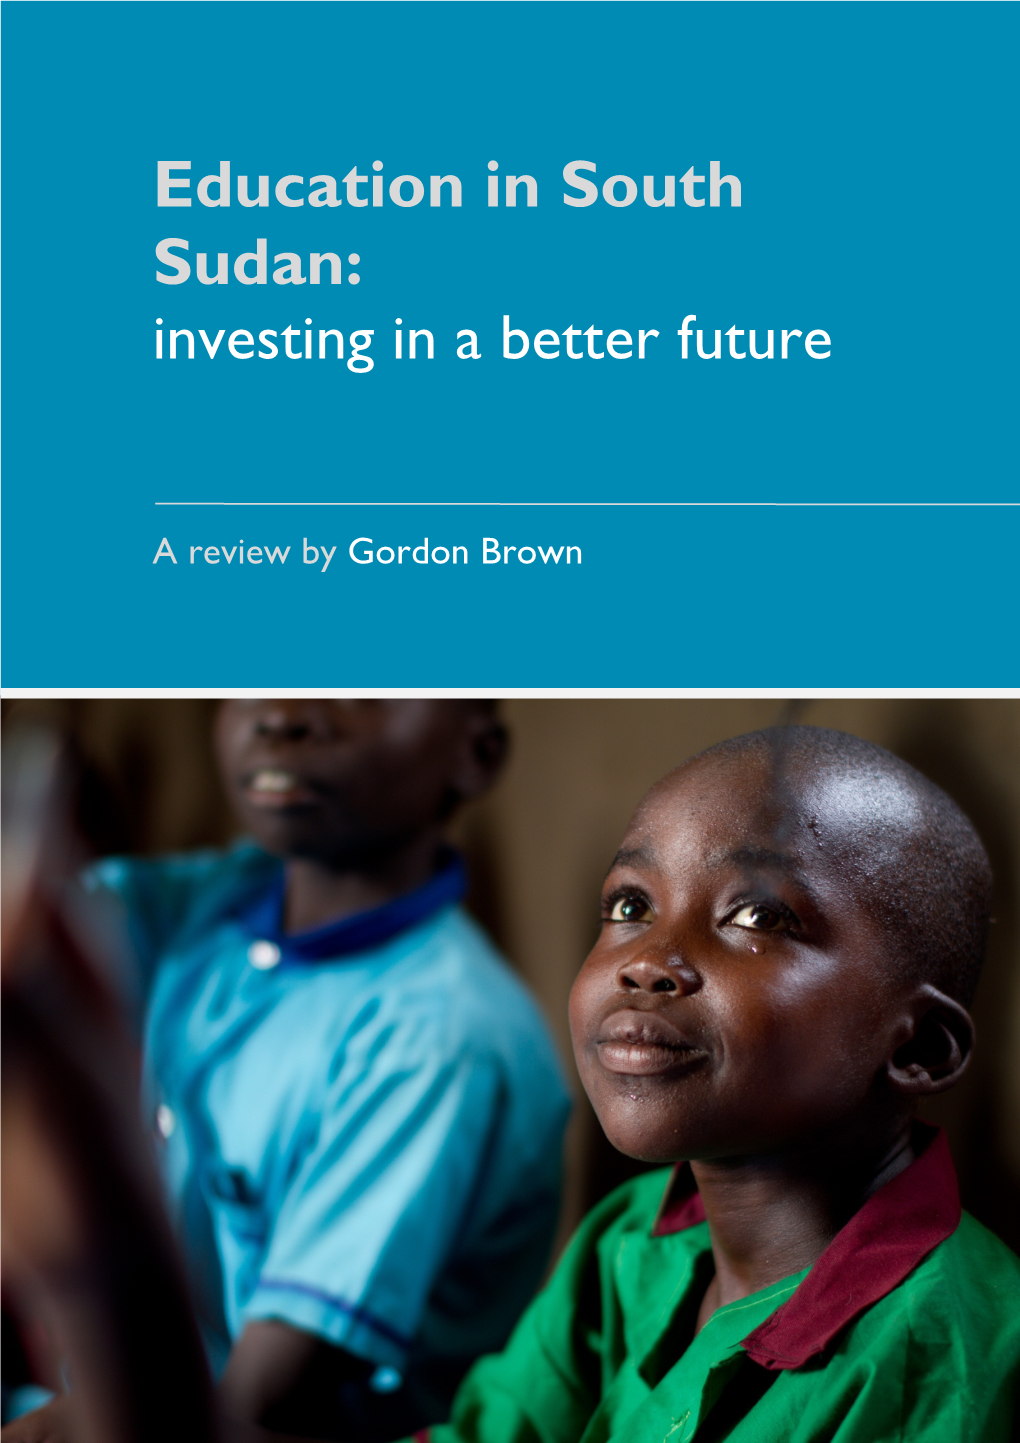 Education in South Sudan: Investing in a Better Future